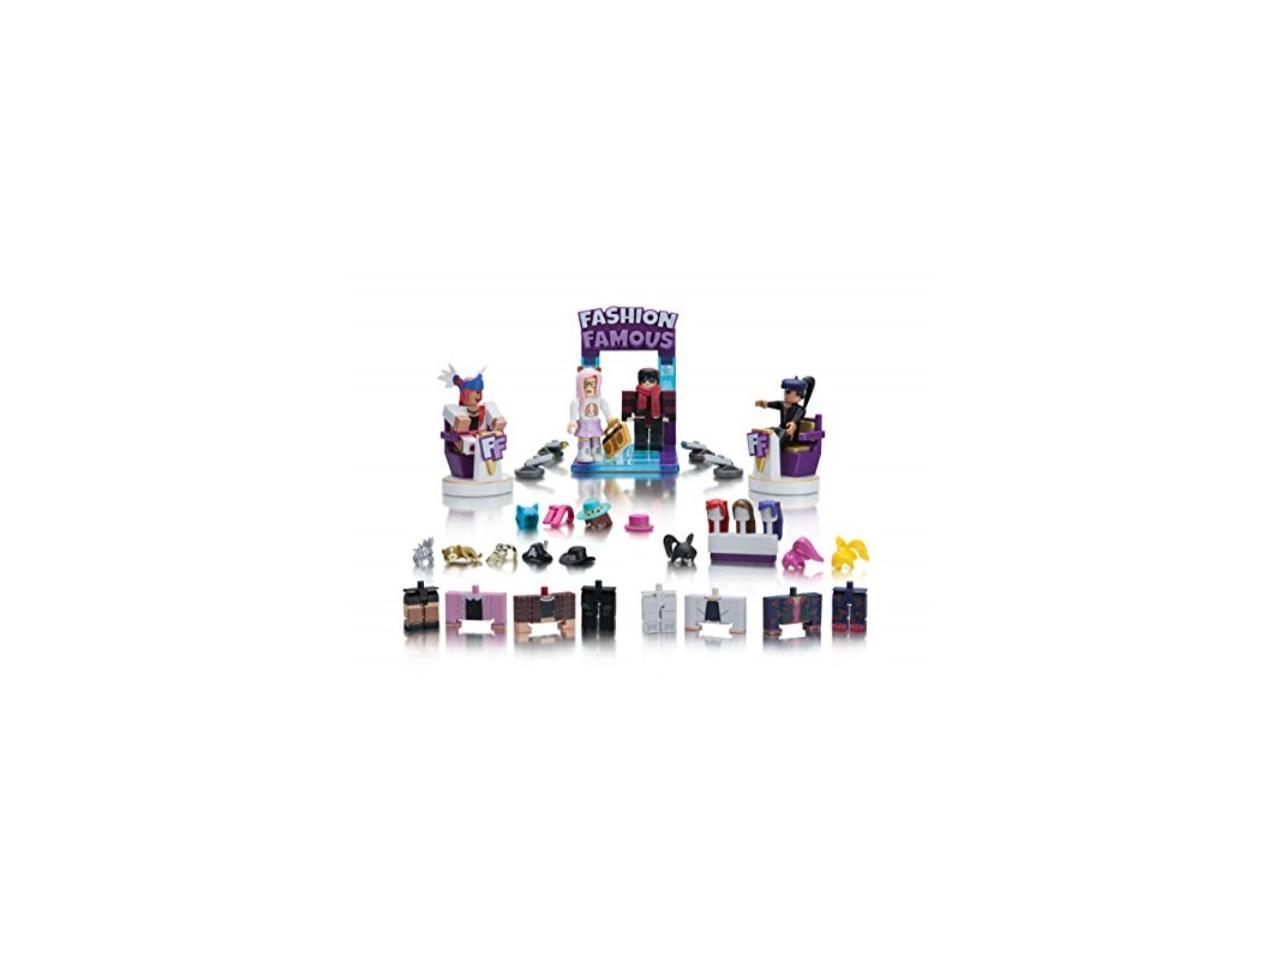 Roblox Celebrity Fashion Famous Playset Newegg Com - roblox for ps3 free download